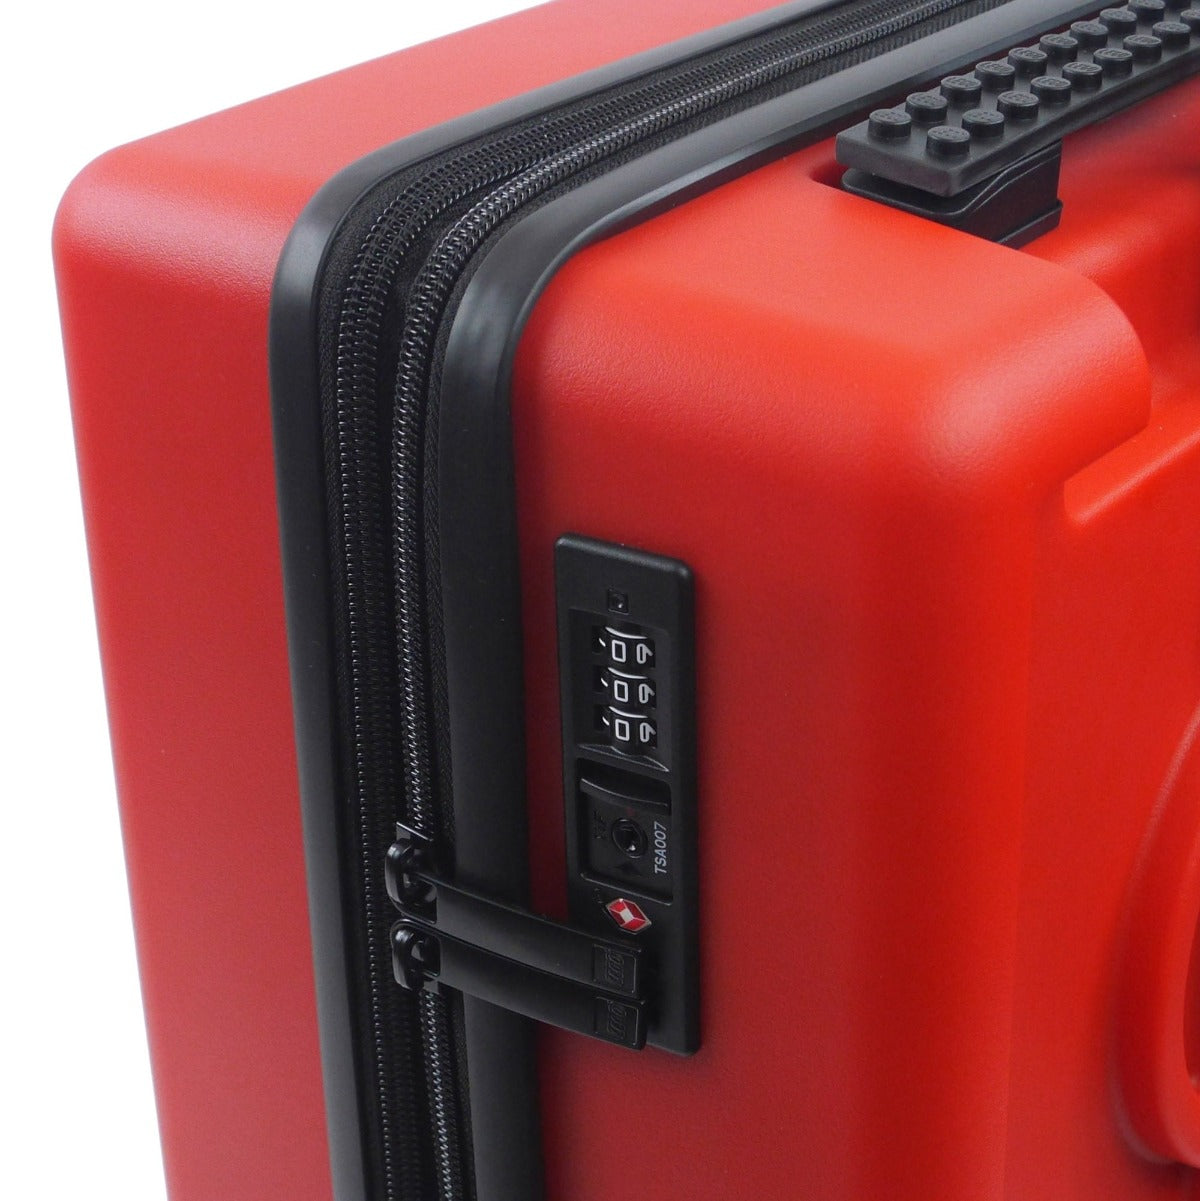 Red Lego Signature Brick Trolley 22-inch carry-on hardshell rolling luggage